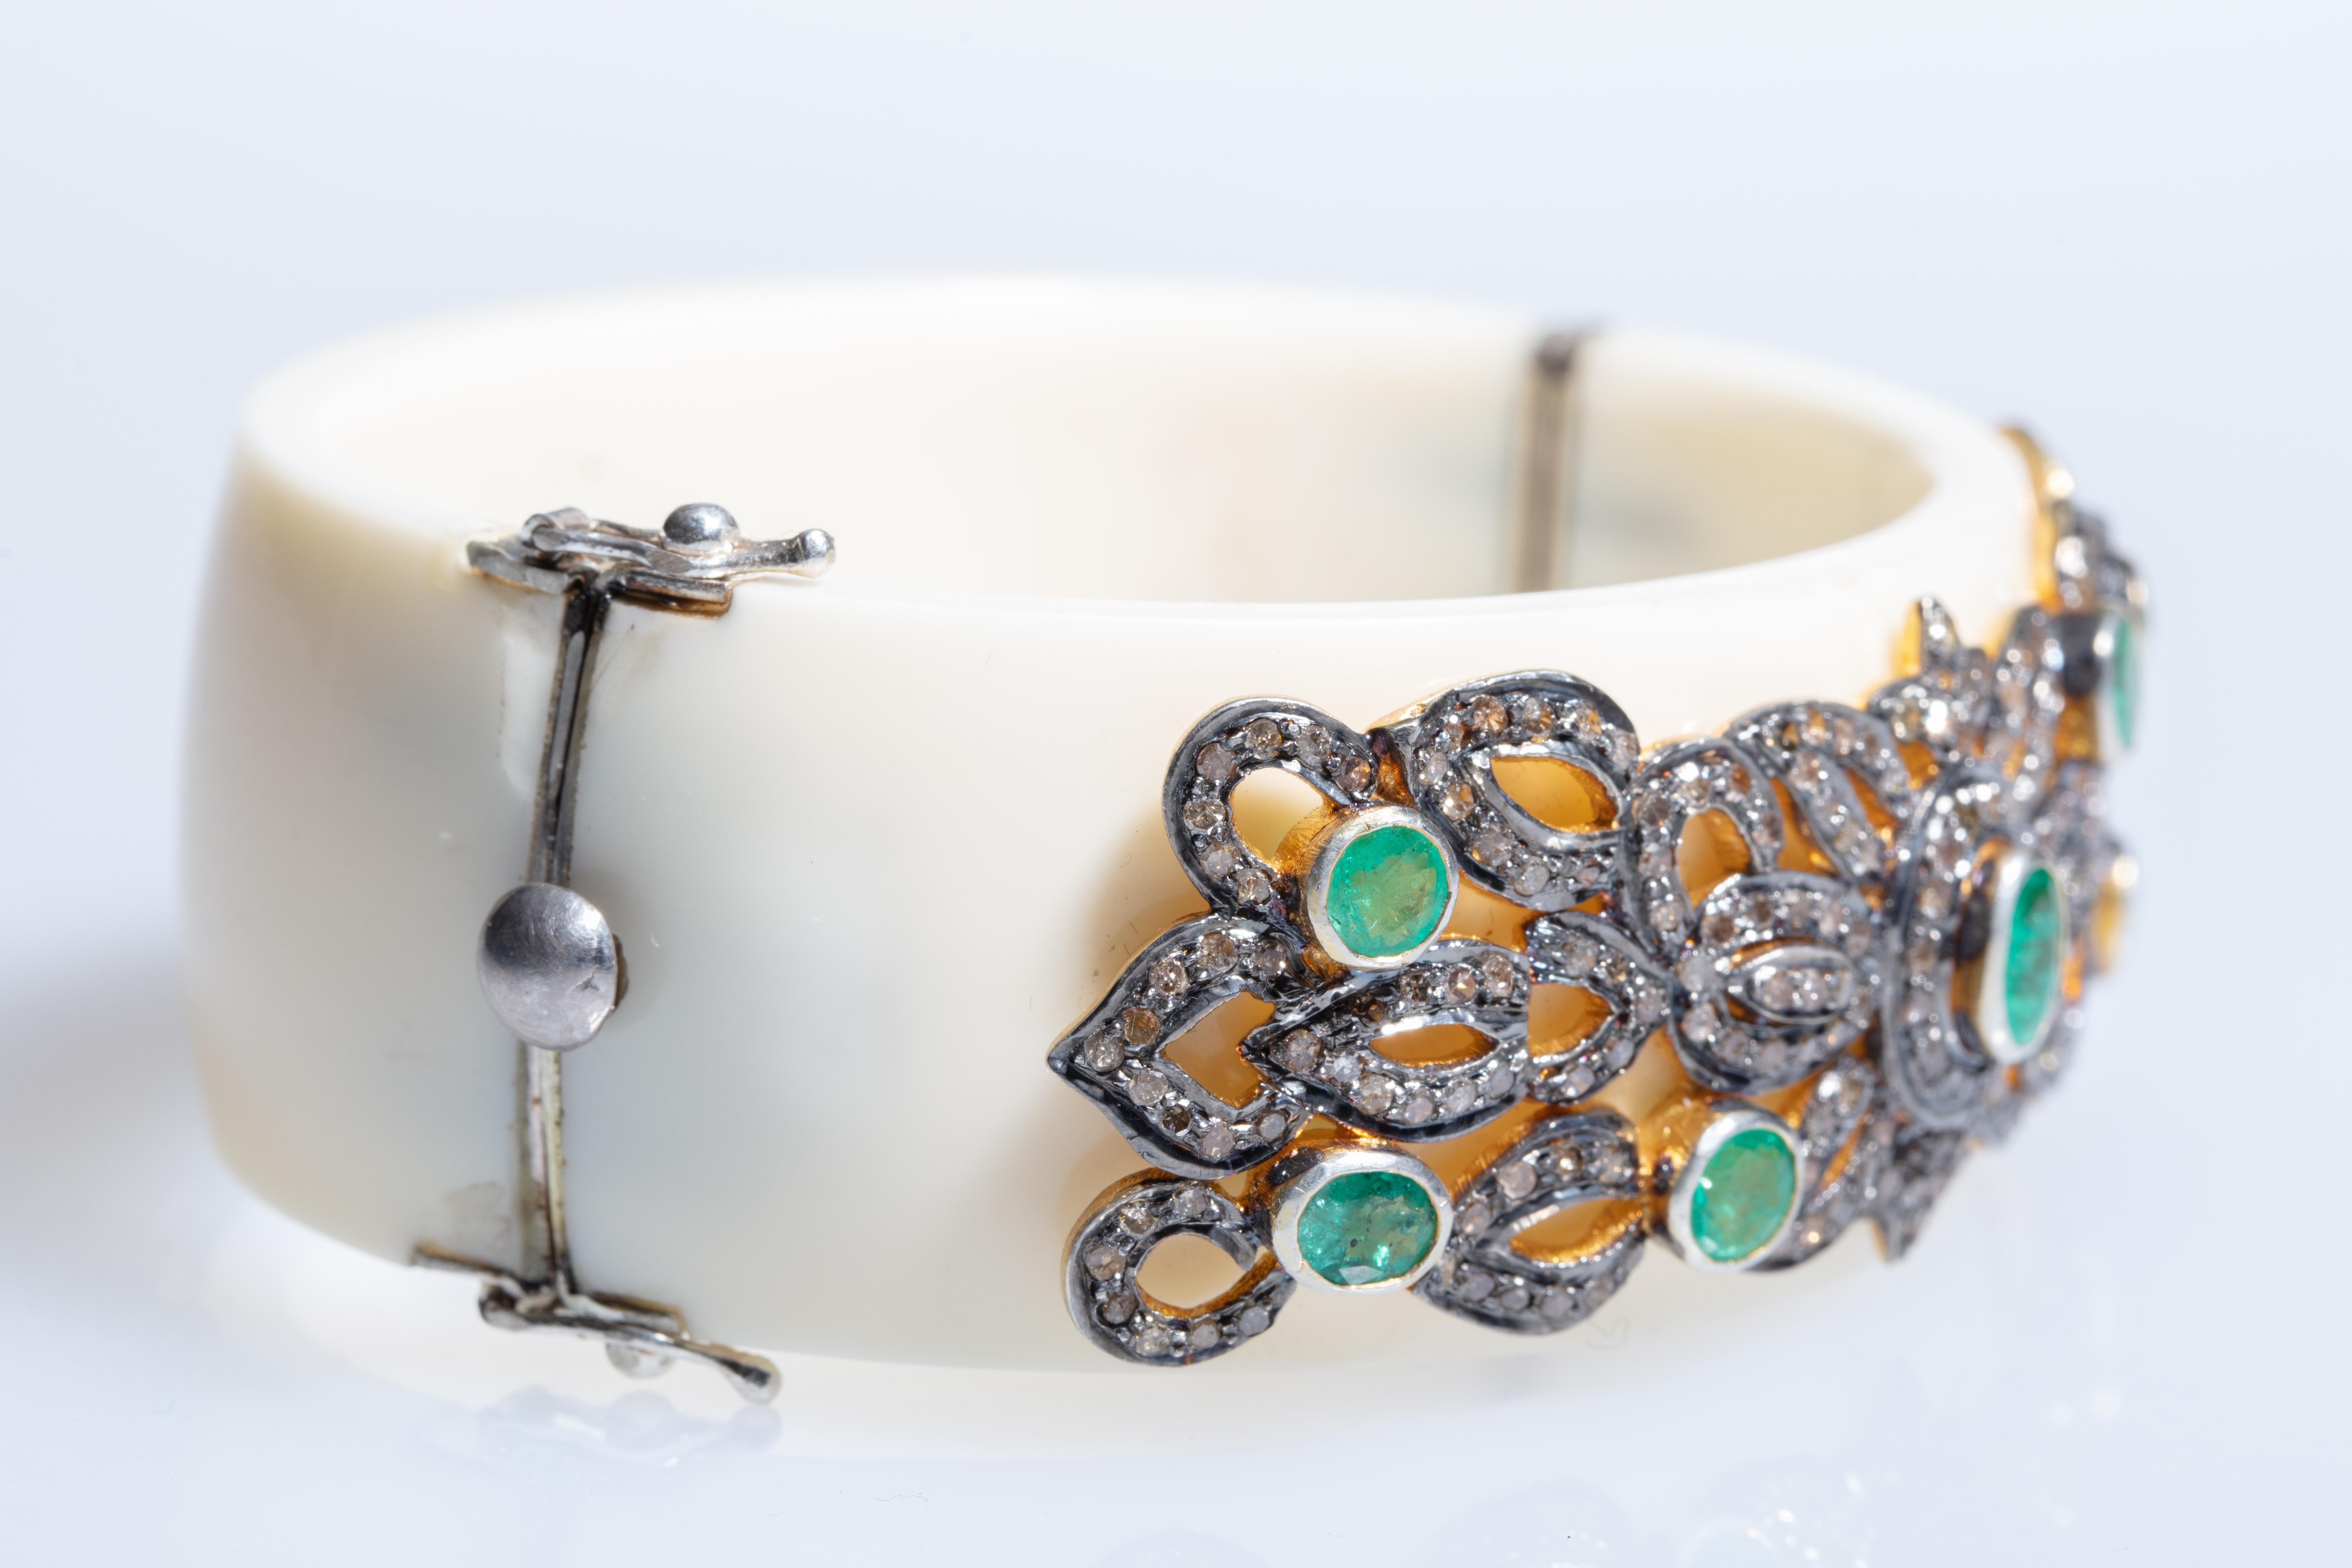 A white Bakelite cuff bracelet with 7 faceted emeralds surrounded by pave' set diamonds in an oxidized sterling silver.  The oval shape of the cuff keeps the workmanship on top of the wrist.  Weight of diamonds is 2.47 carats; emeralds are 2.48